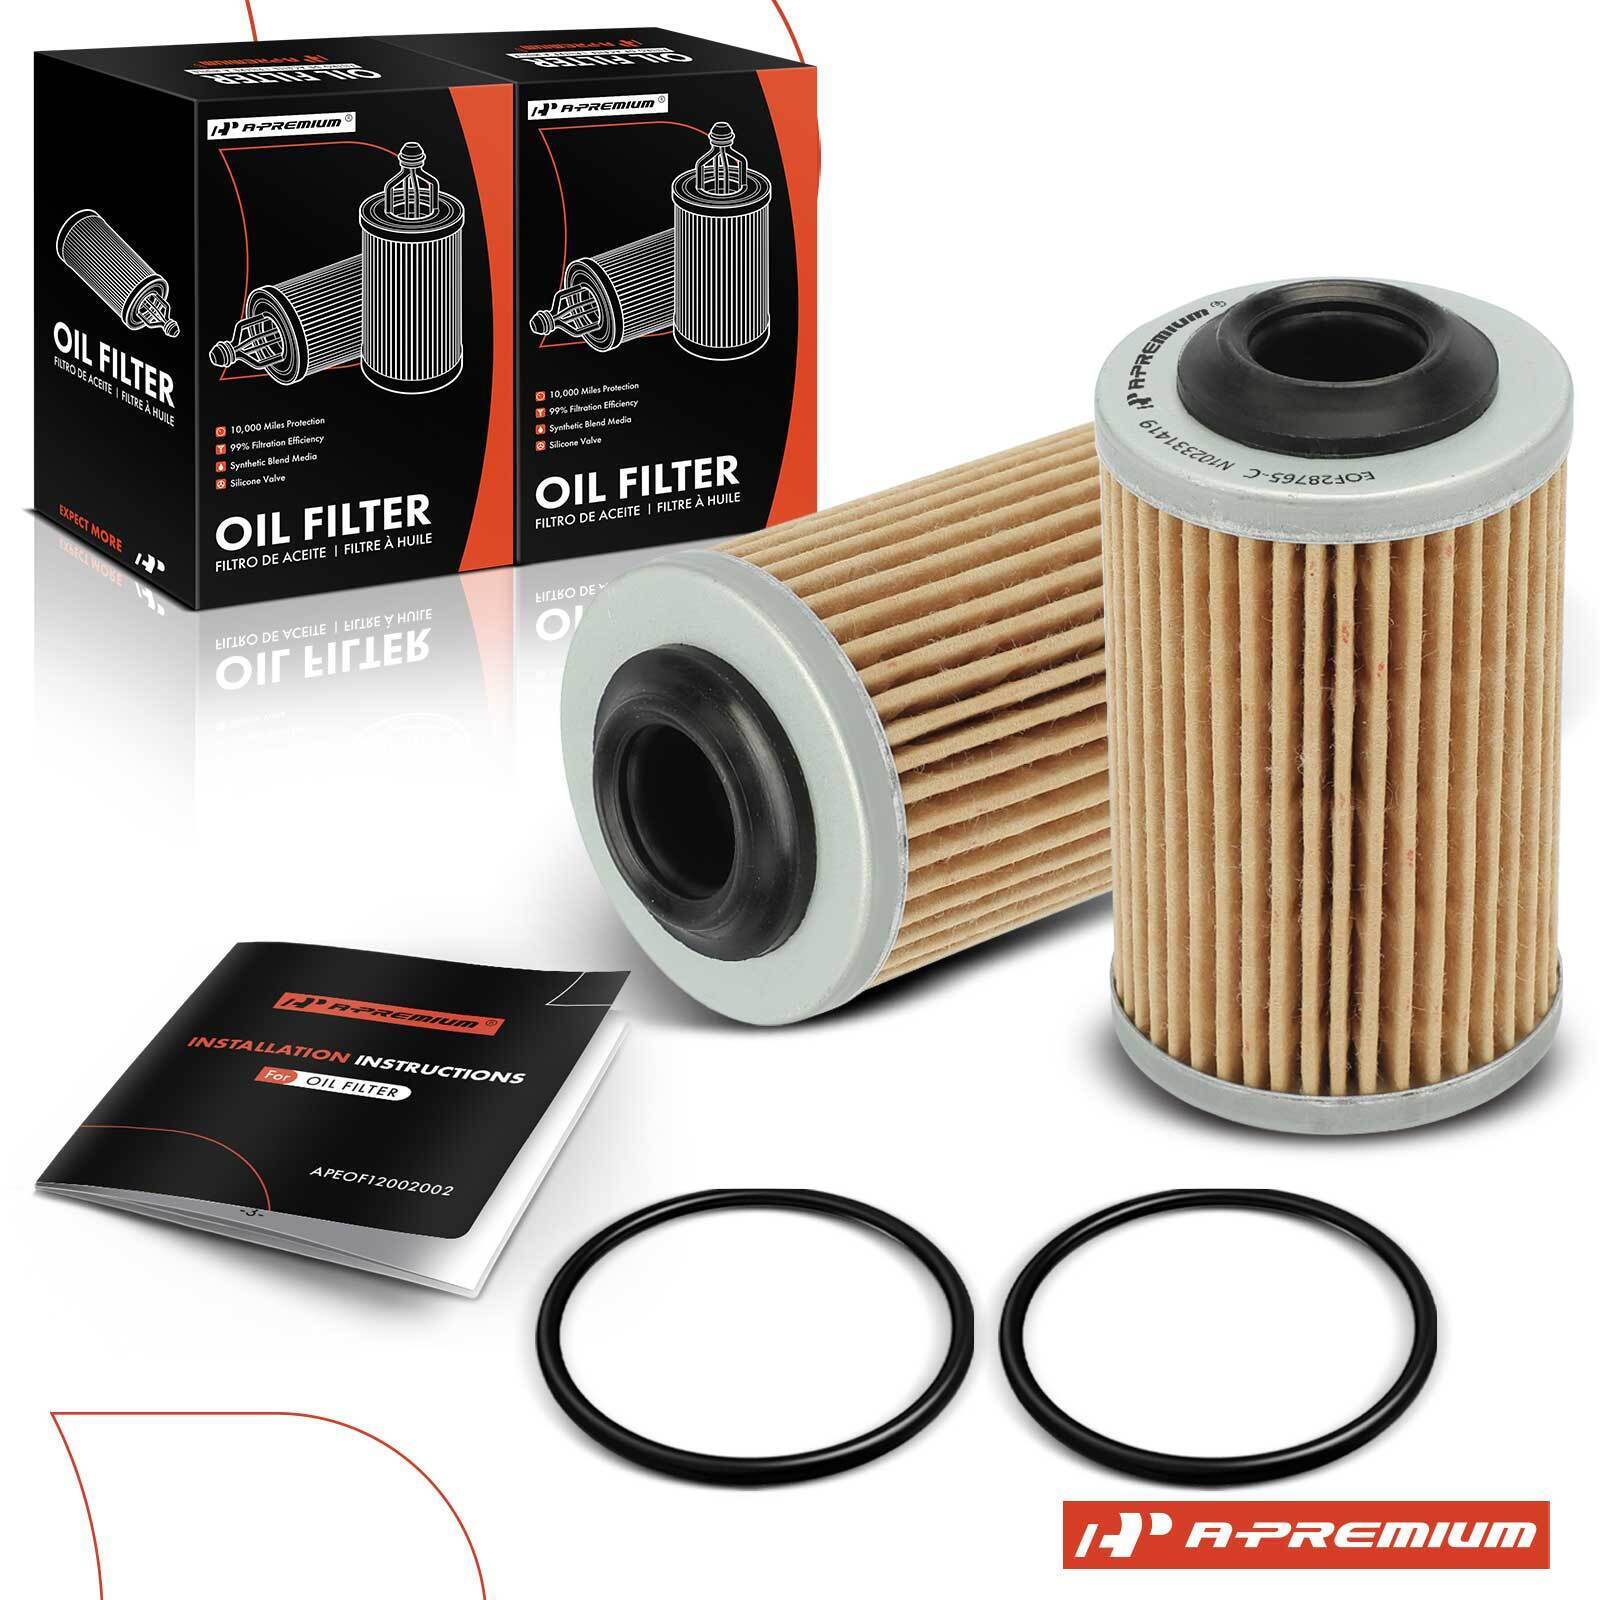 2x Engine Oil Filter for Chevrolet Colorado GMC Canyon 2015-2016 Cadillac CTS